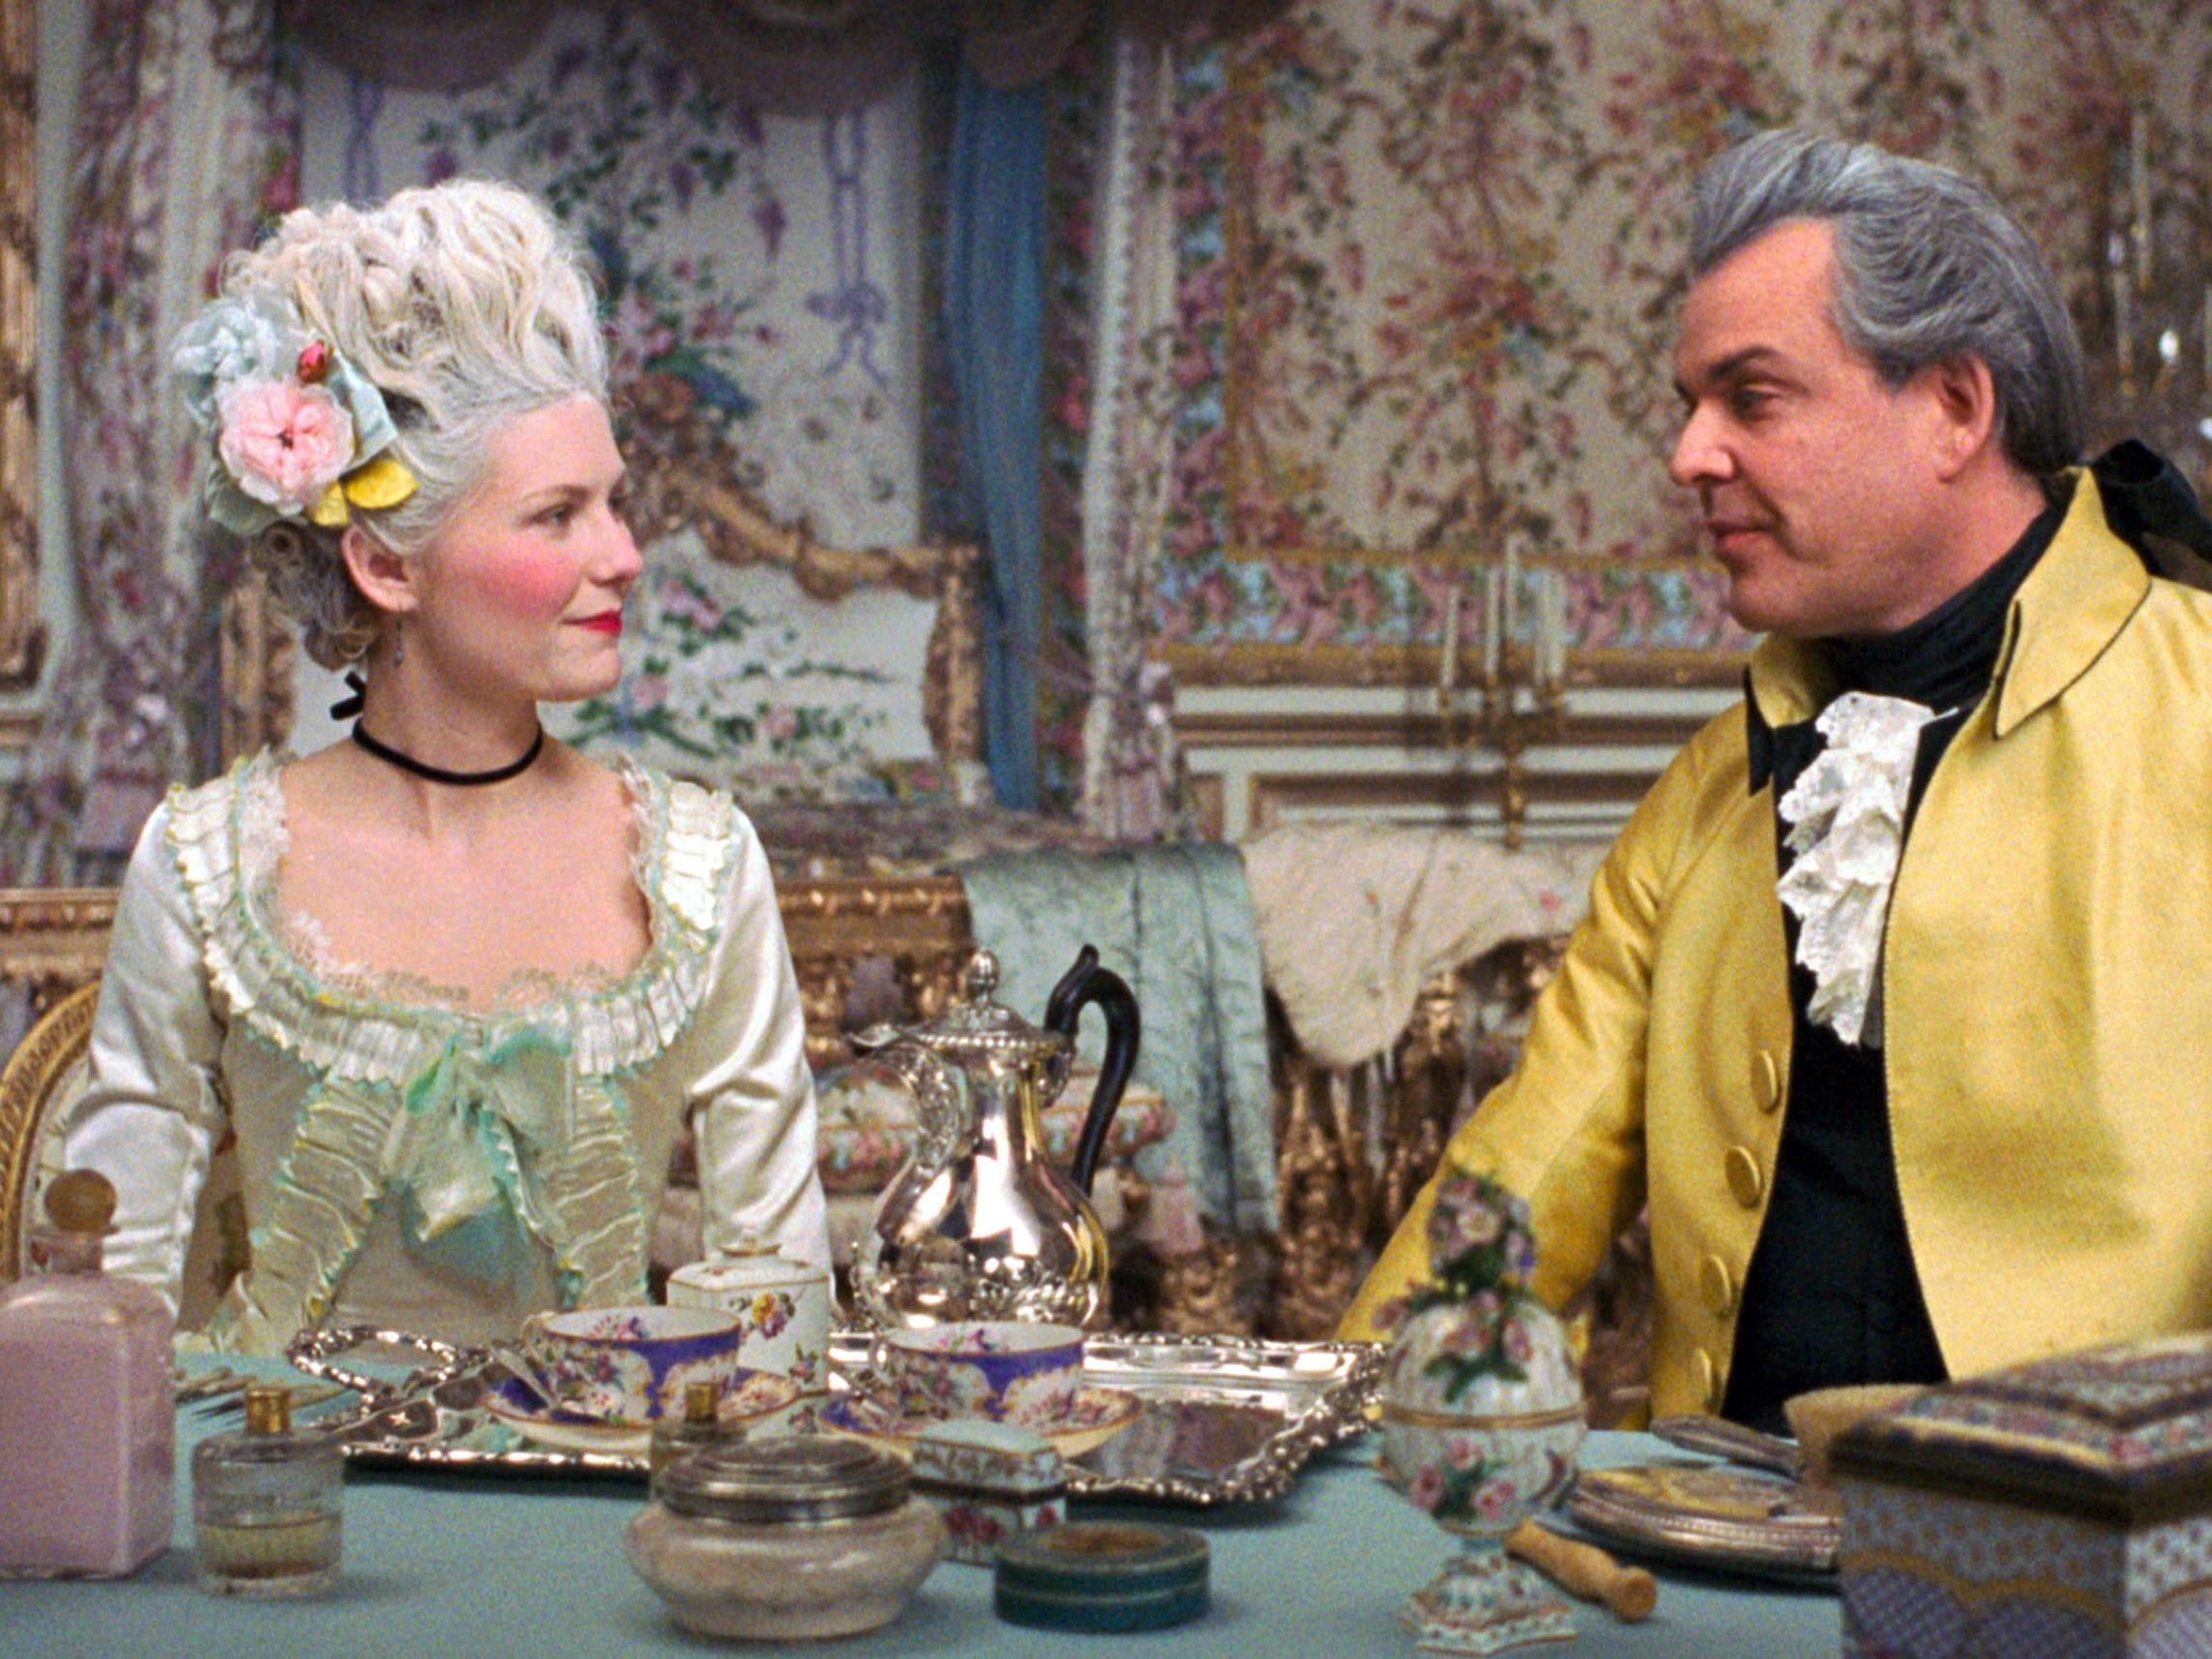 Marie Antoinette's famous phrase comes from Rousseau's autobiography